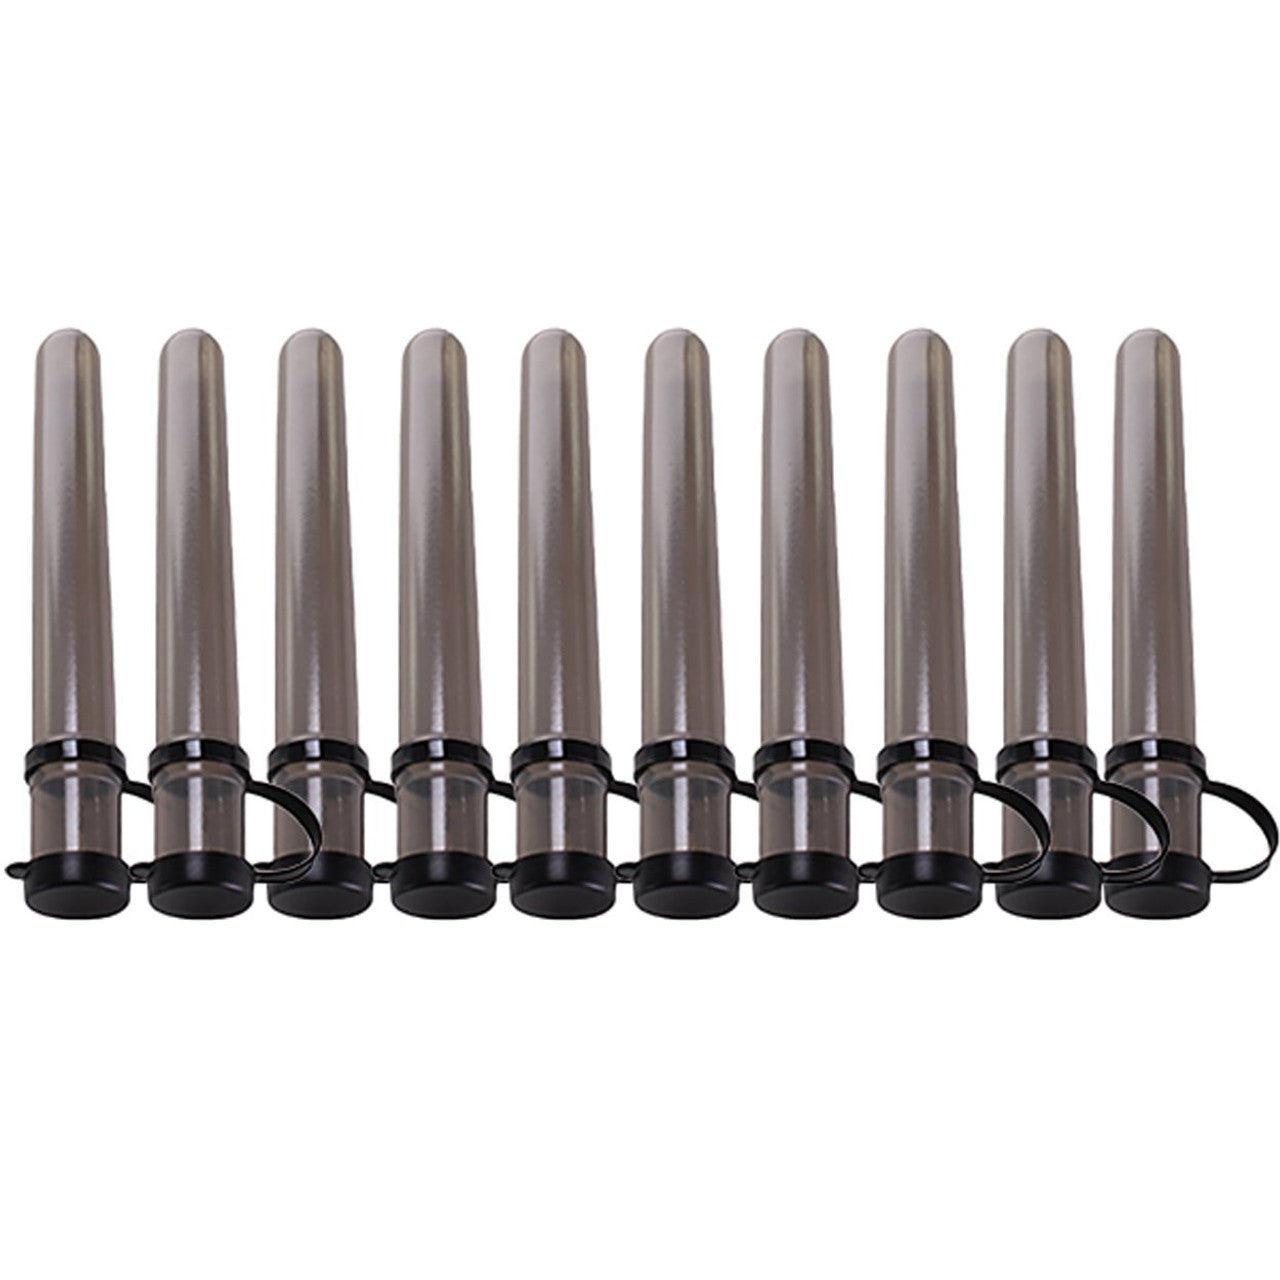 10 Pack - Empire Paintball 10 Round Smoke Tubes Pods w/ Caps